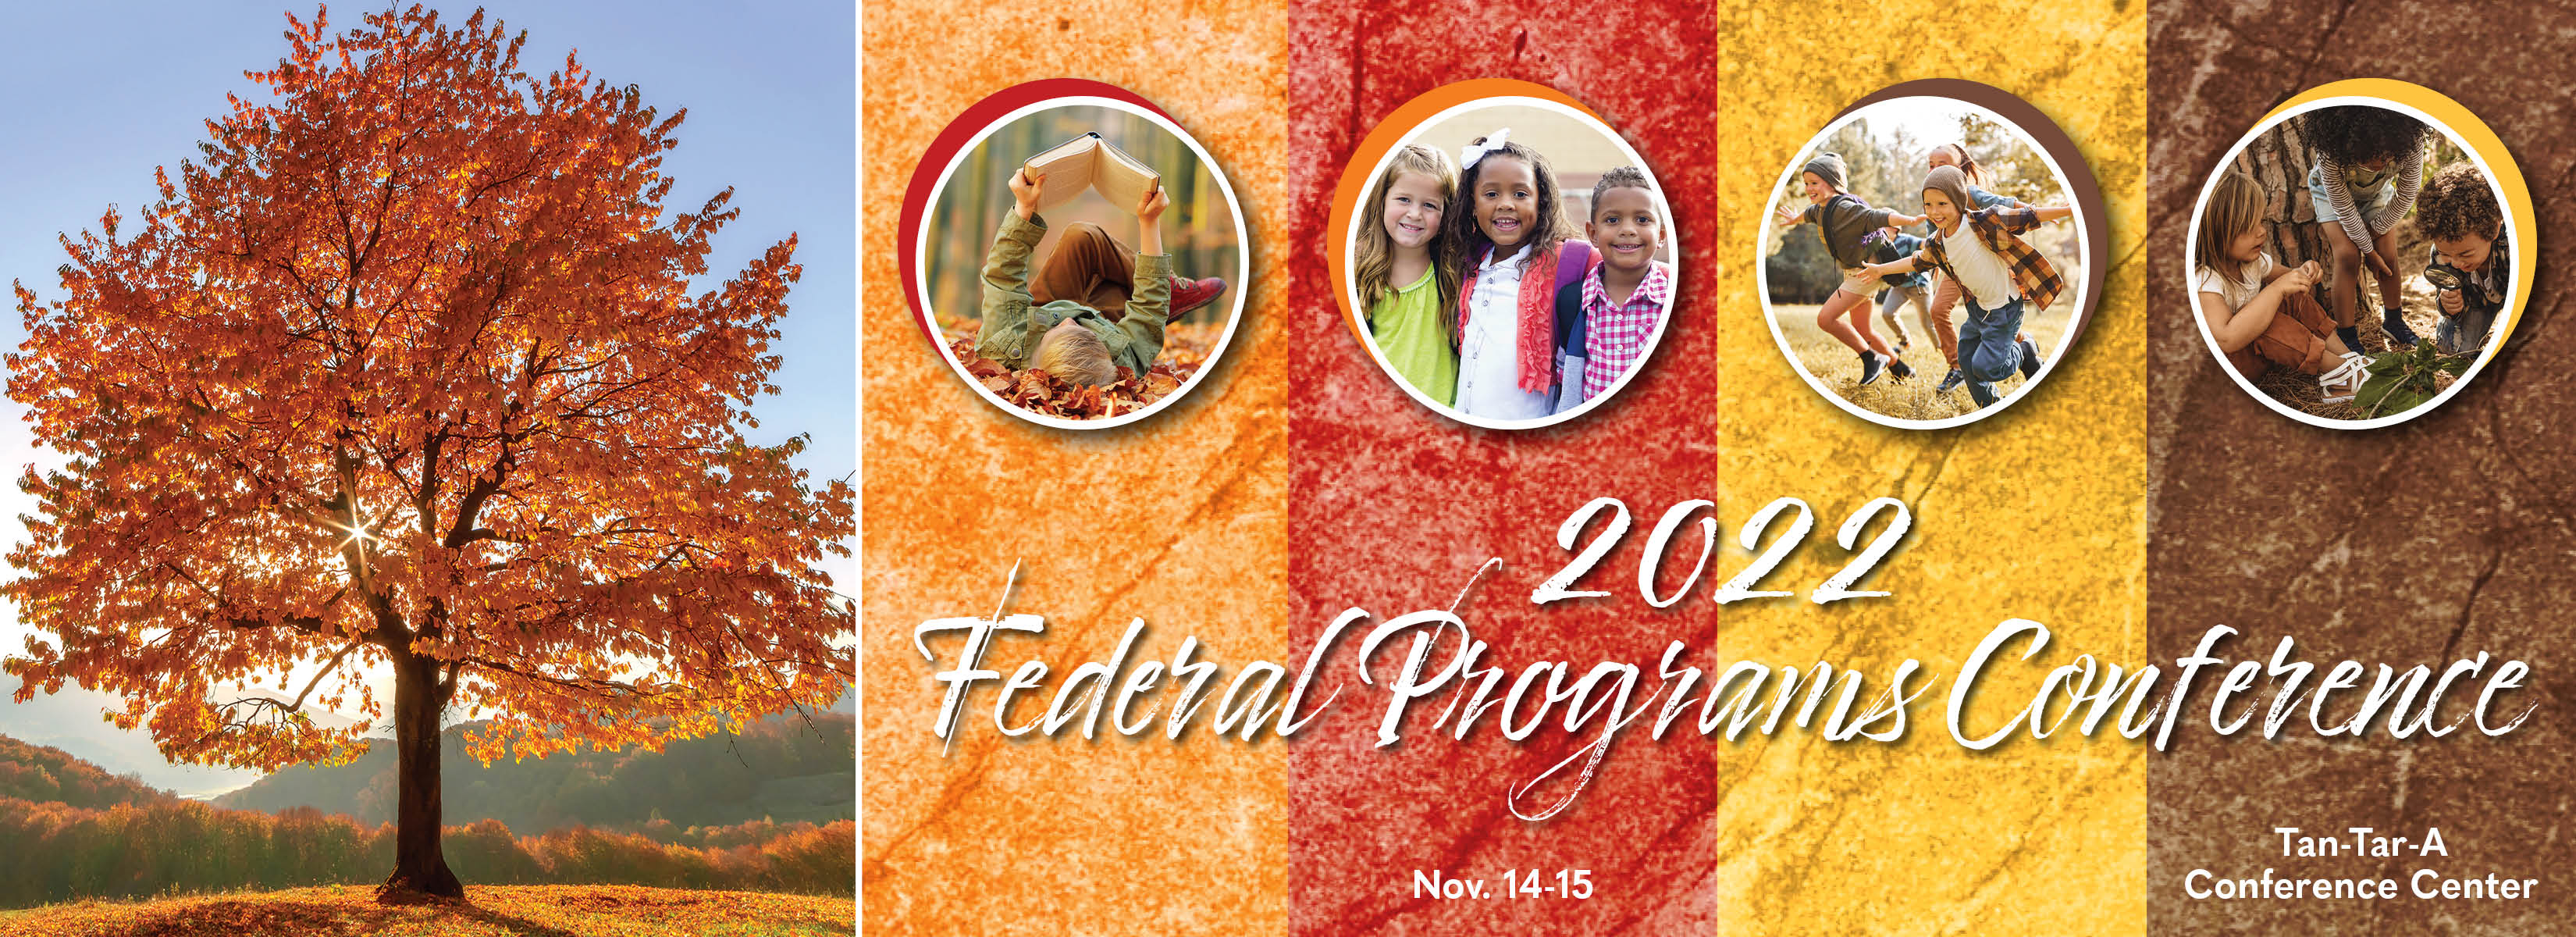 2022 Federal Programs Conference